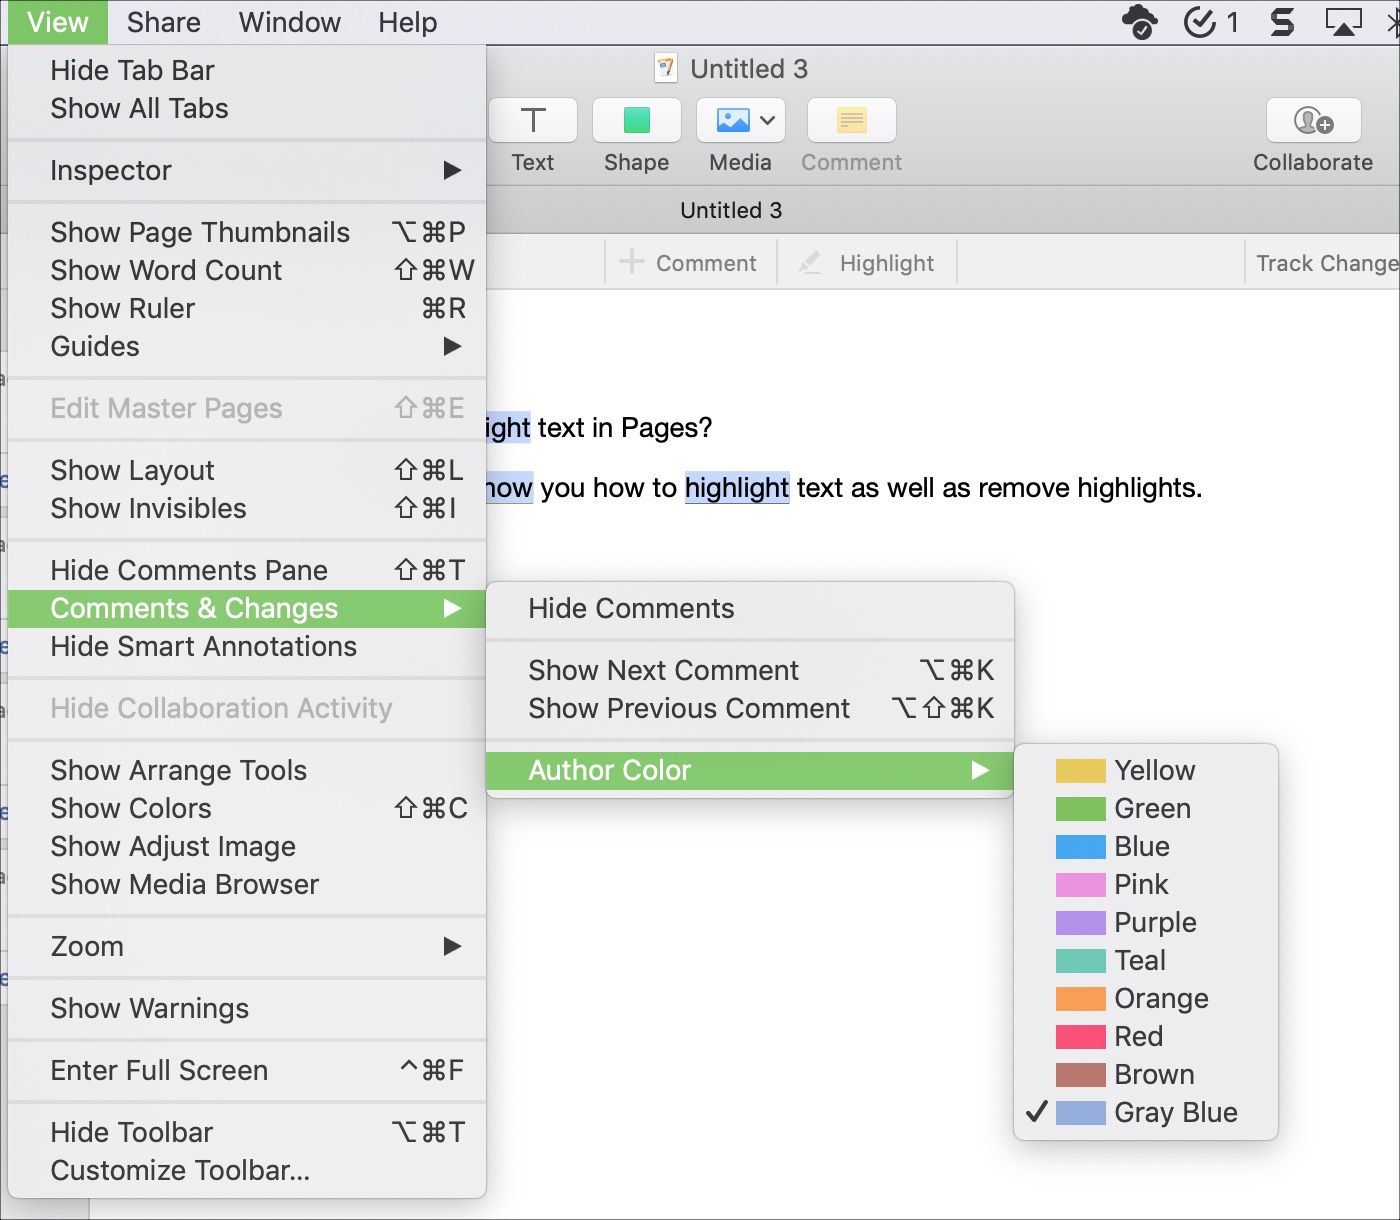 How to highlight text in Pages on Mac and iOS